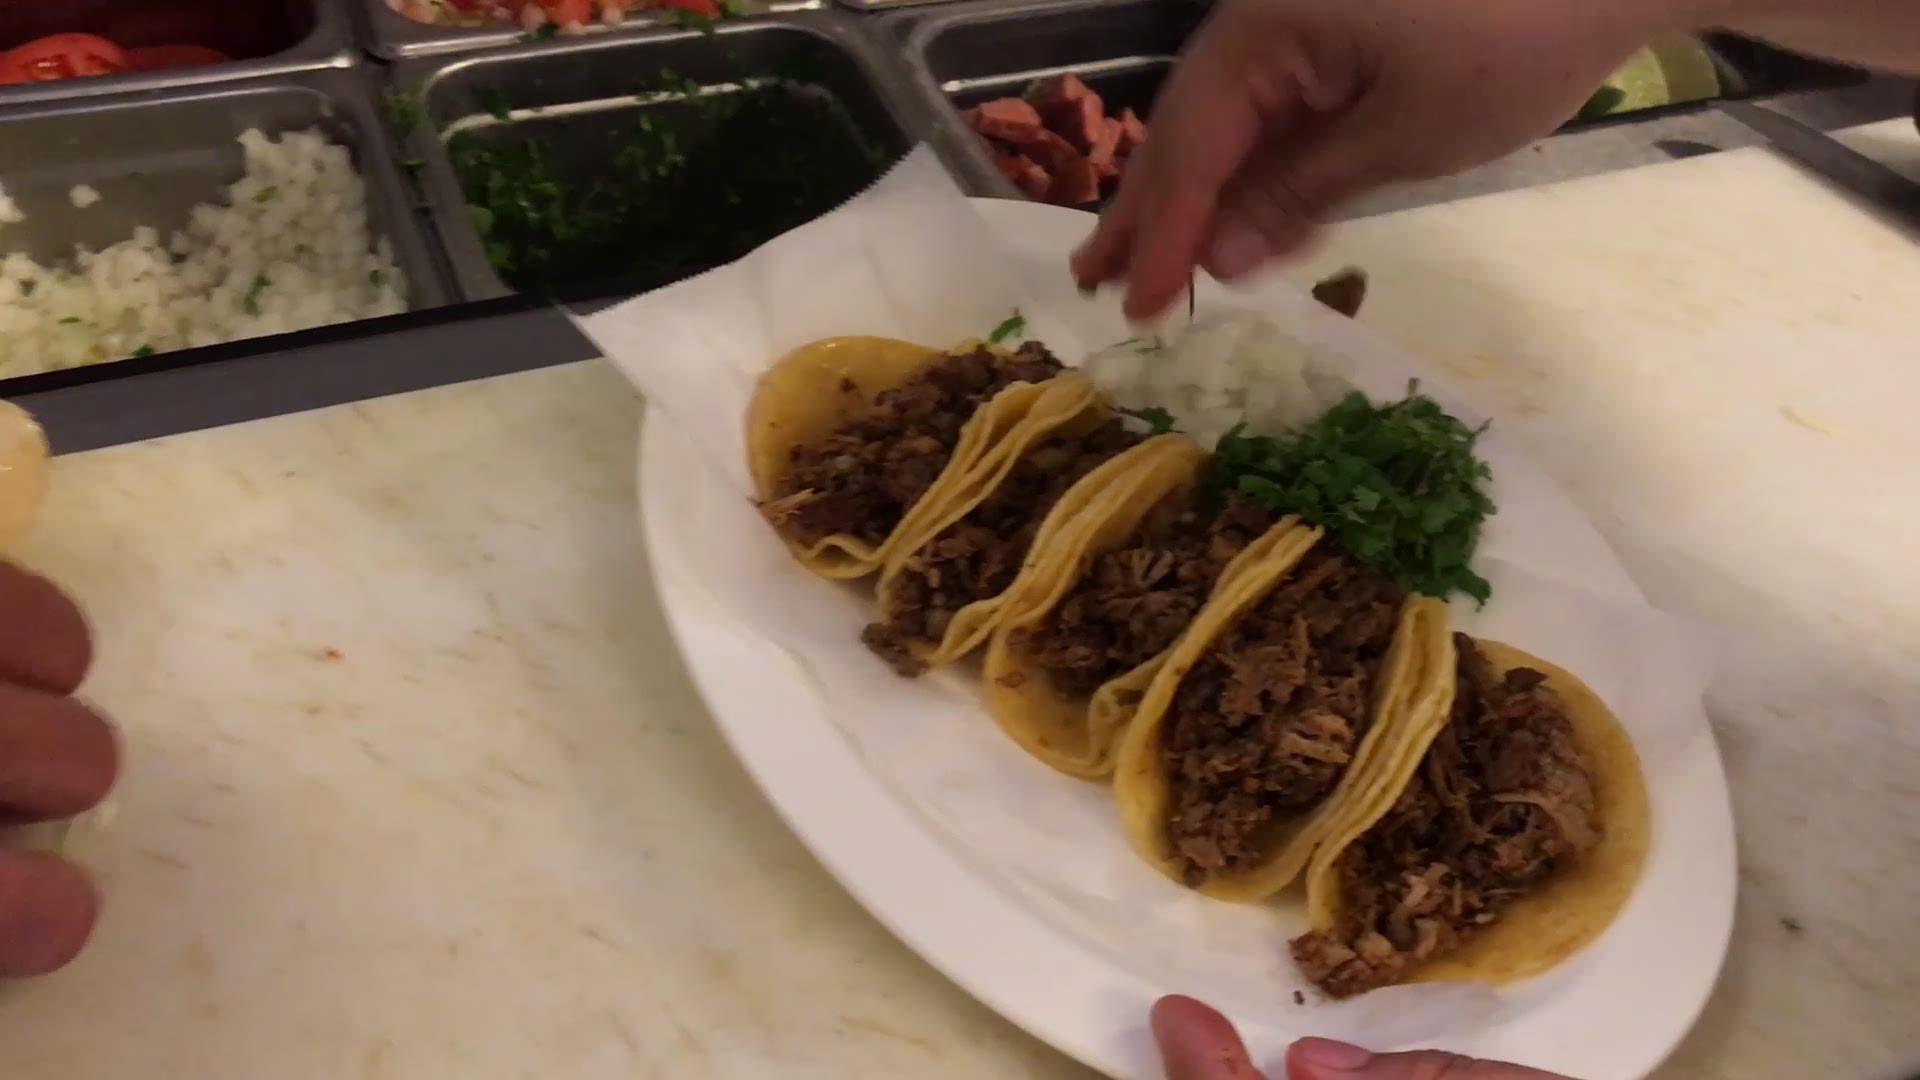 The Taco Tuesday crew took a visit to Taqueria Datapoint 5 to see how their carnitas tacos stack up against the best tacos in San Antonio.